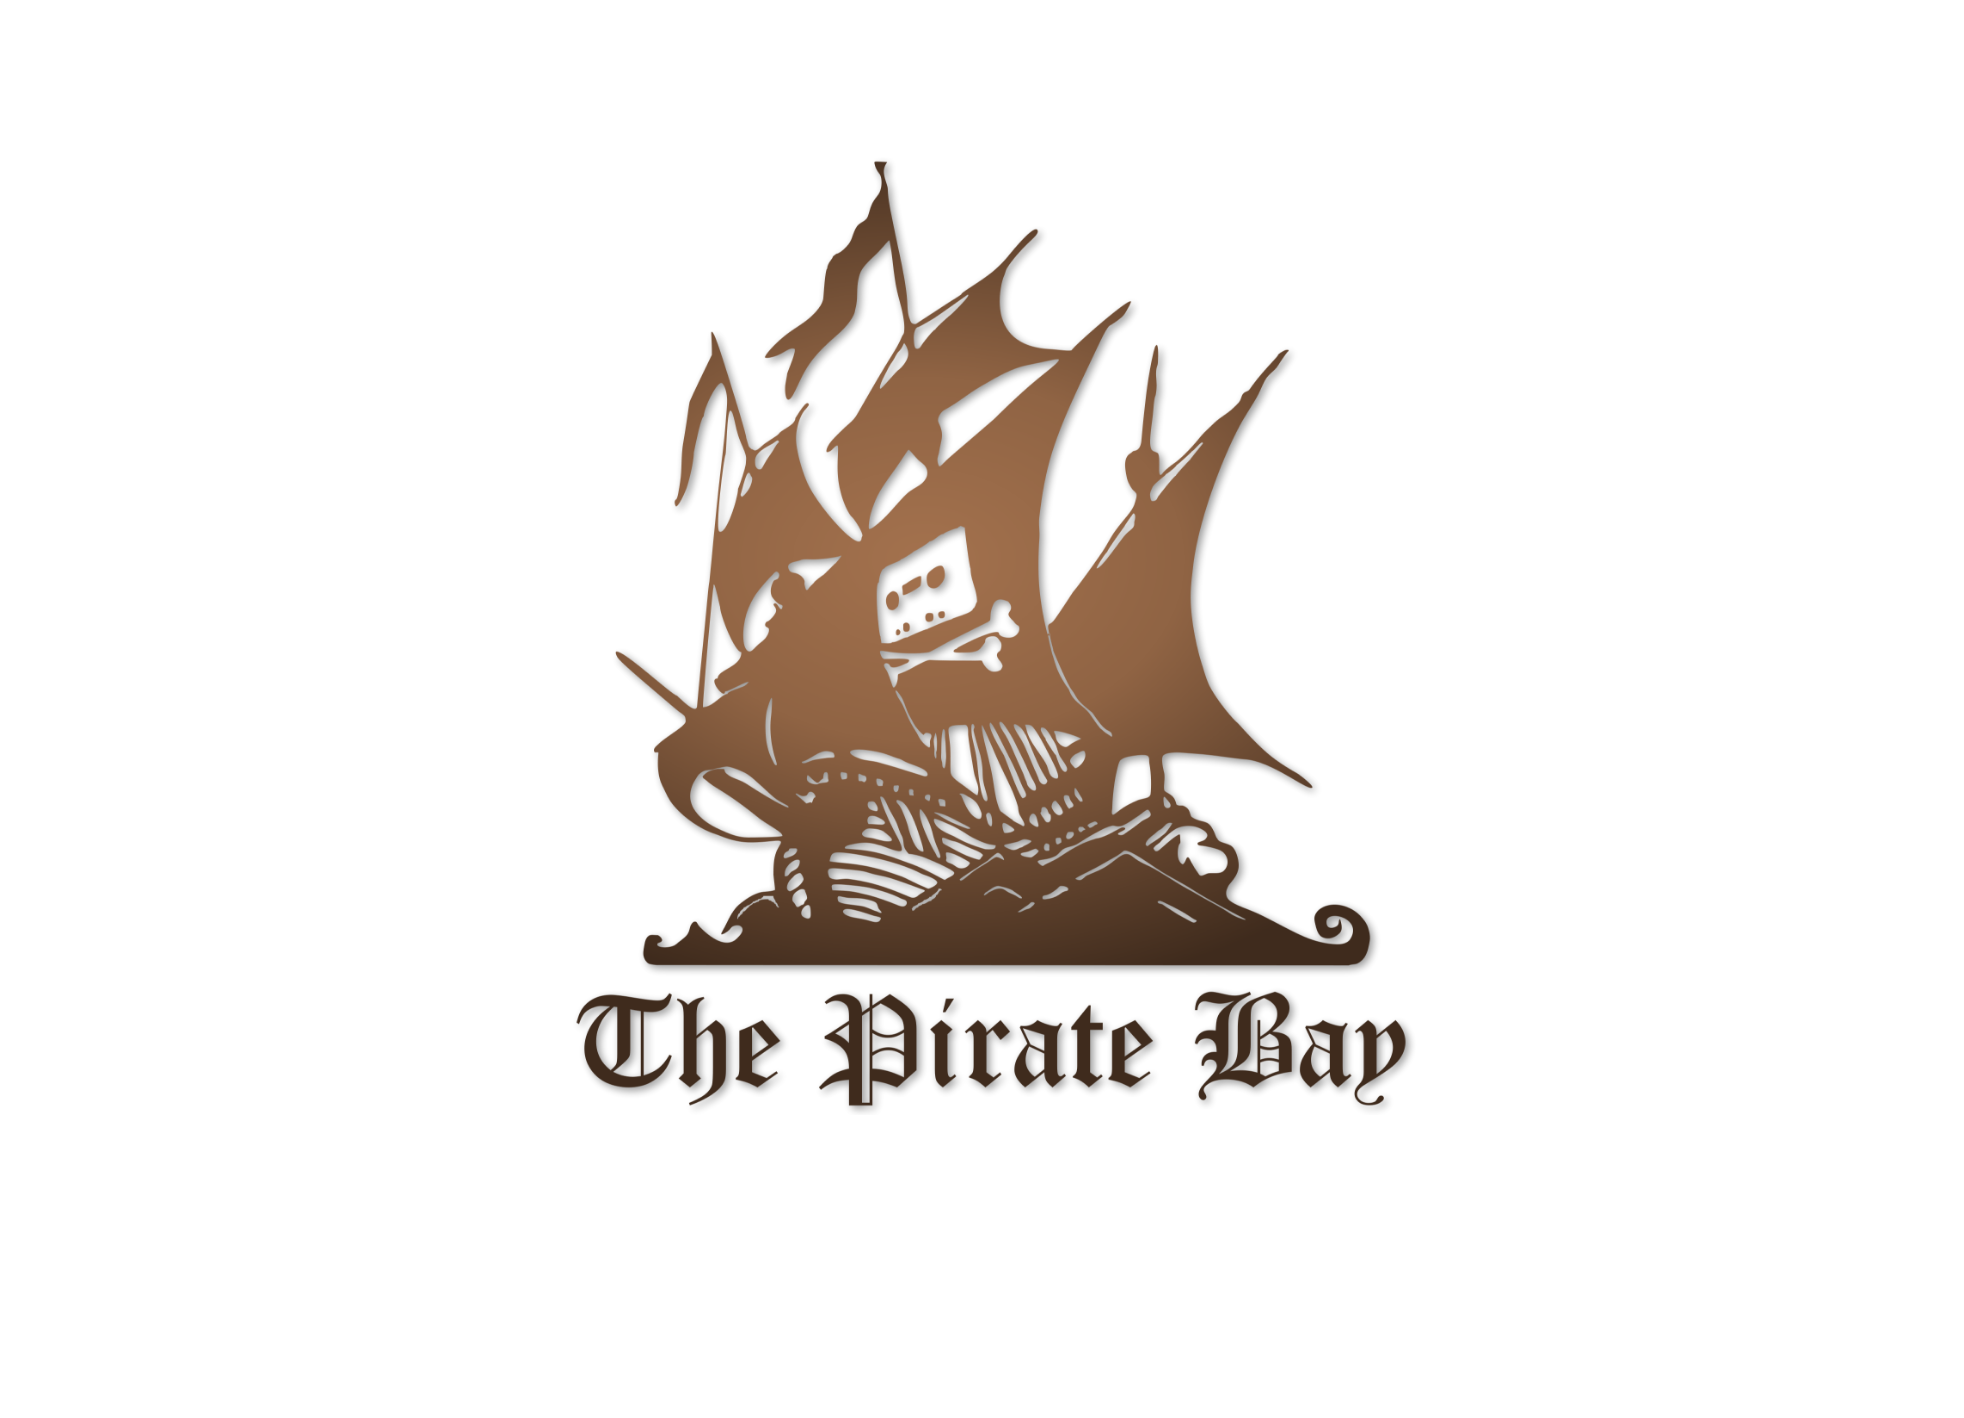 Using the Pirate Bay